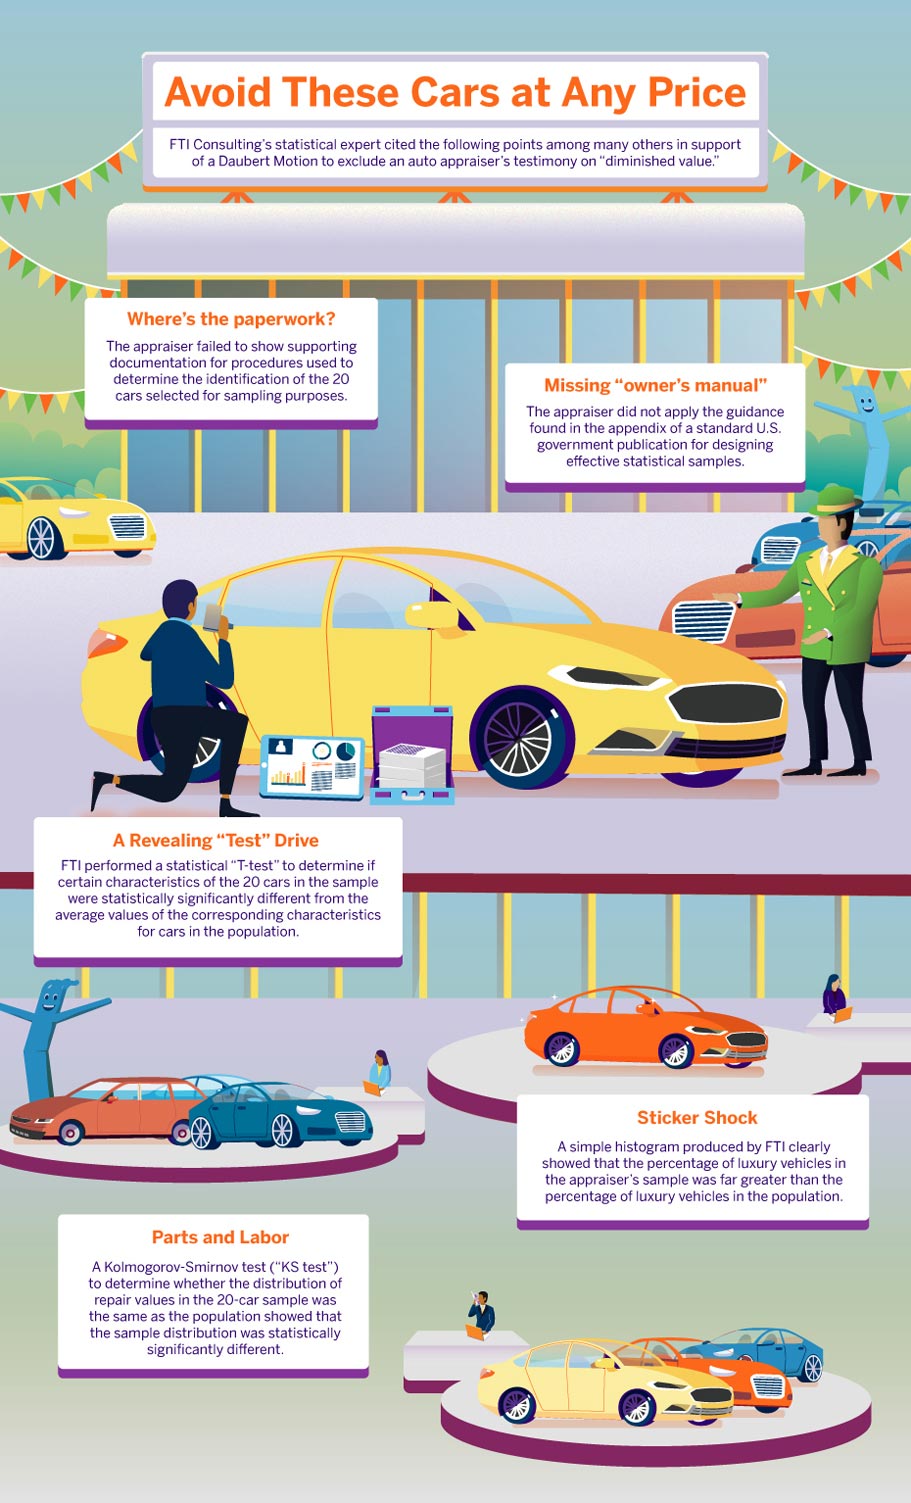 Would You Buy a Used Car From this Man, infographic